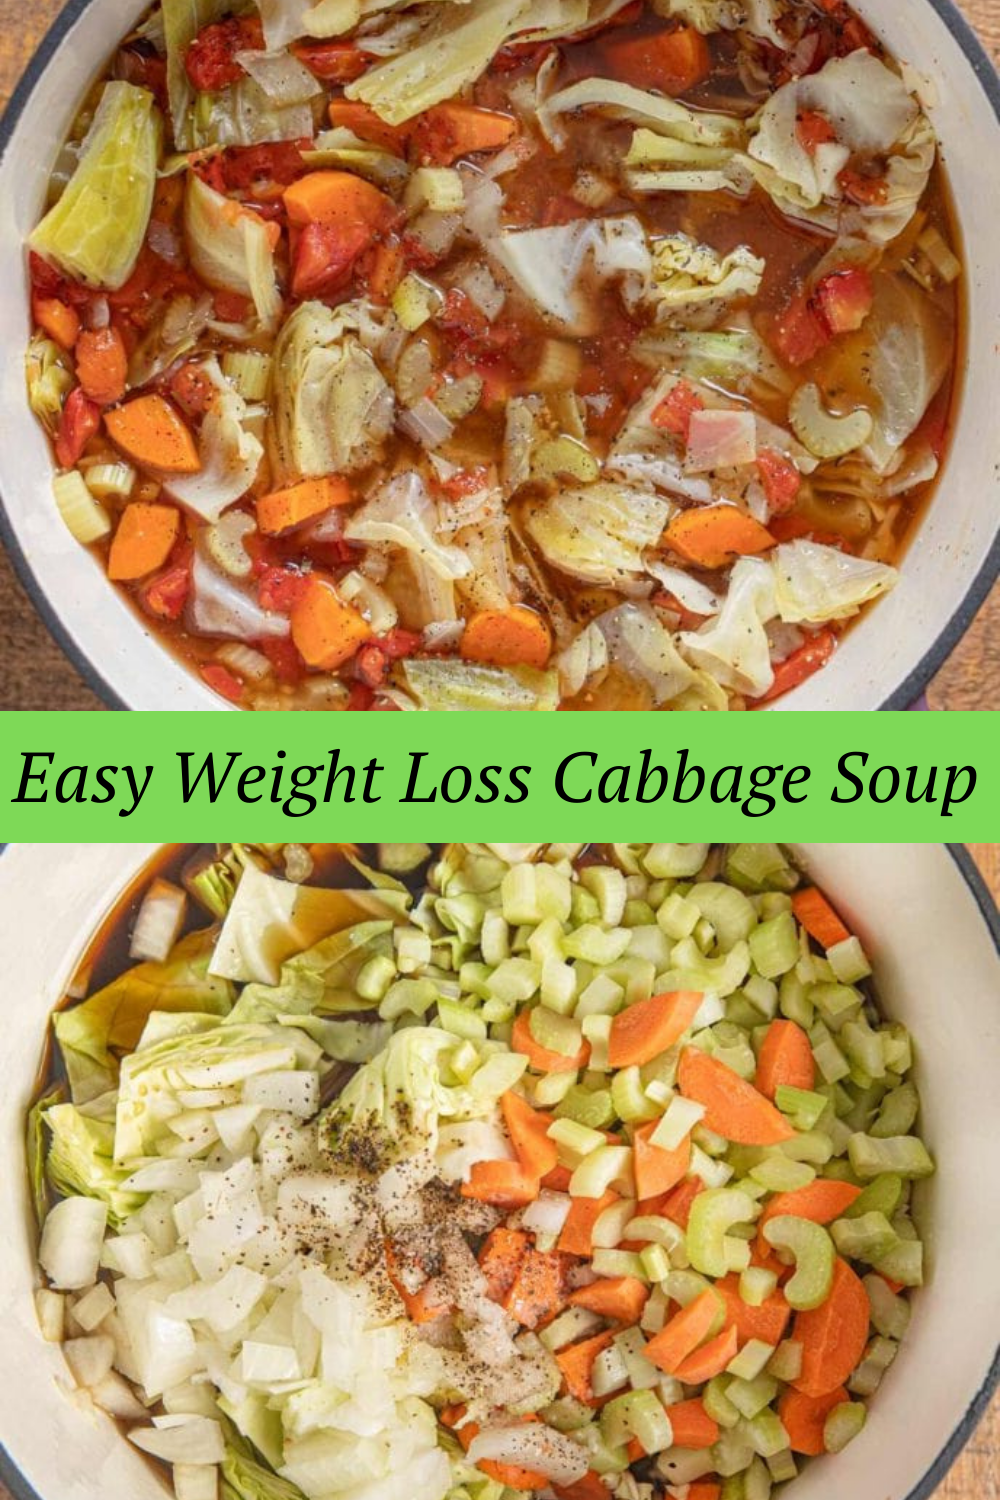 Easy Weight Loss Cabbage Soup